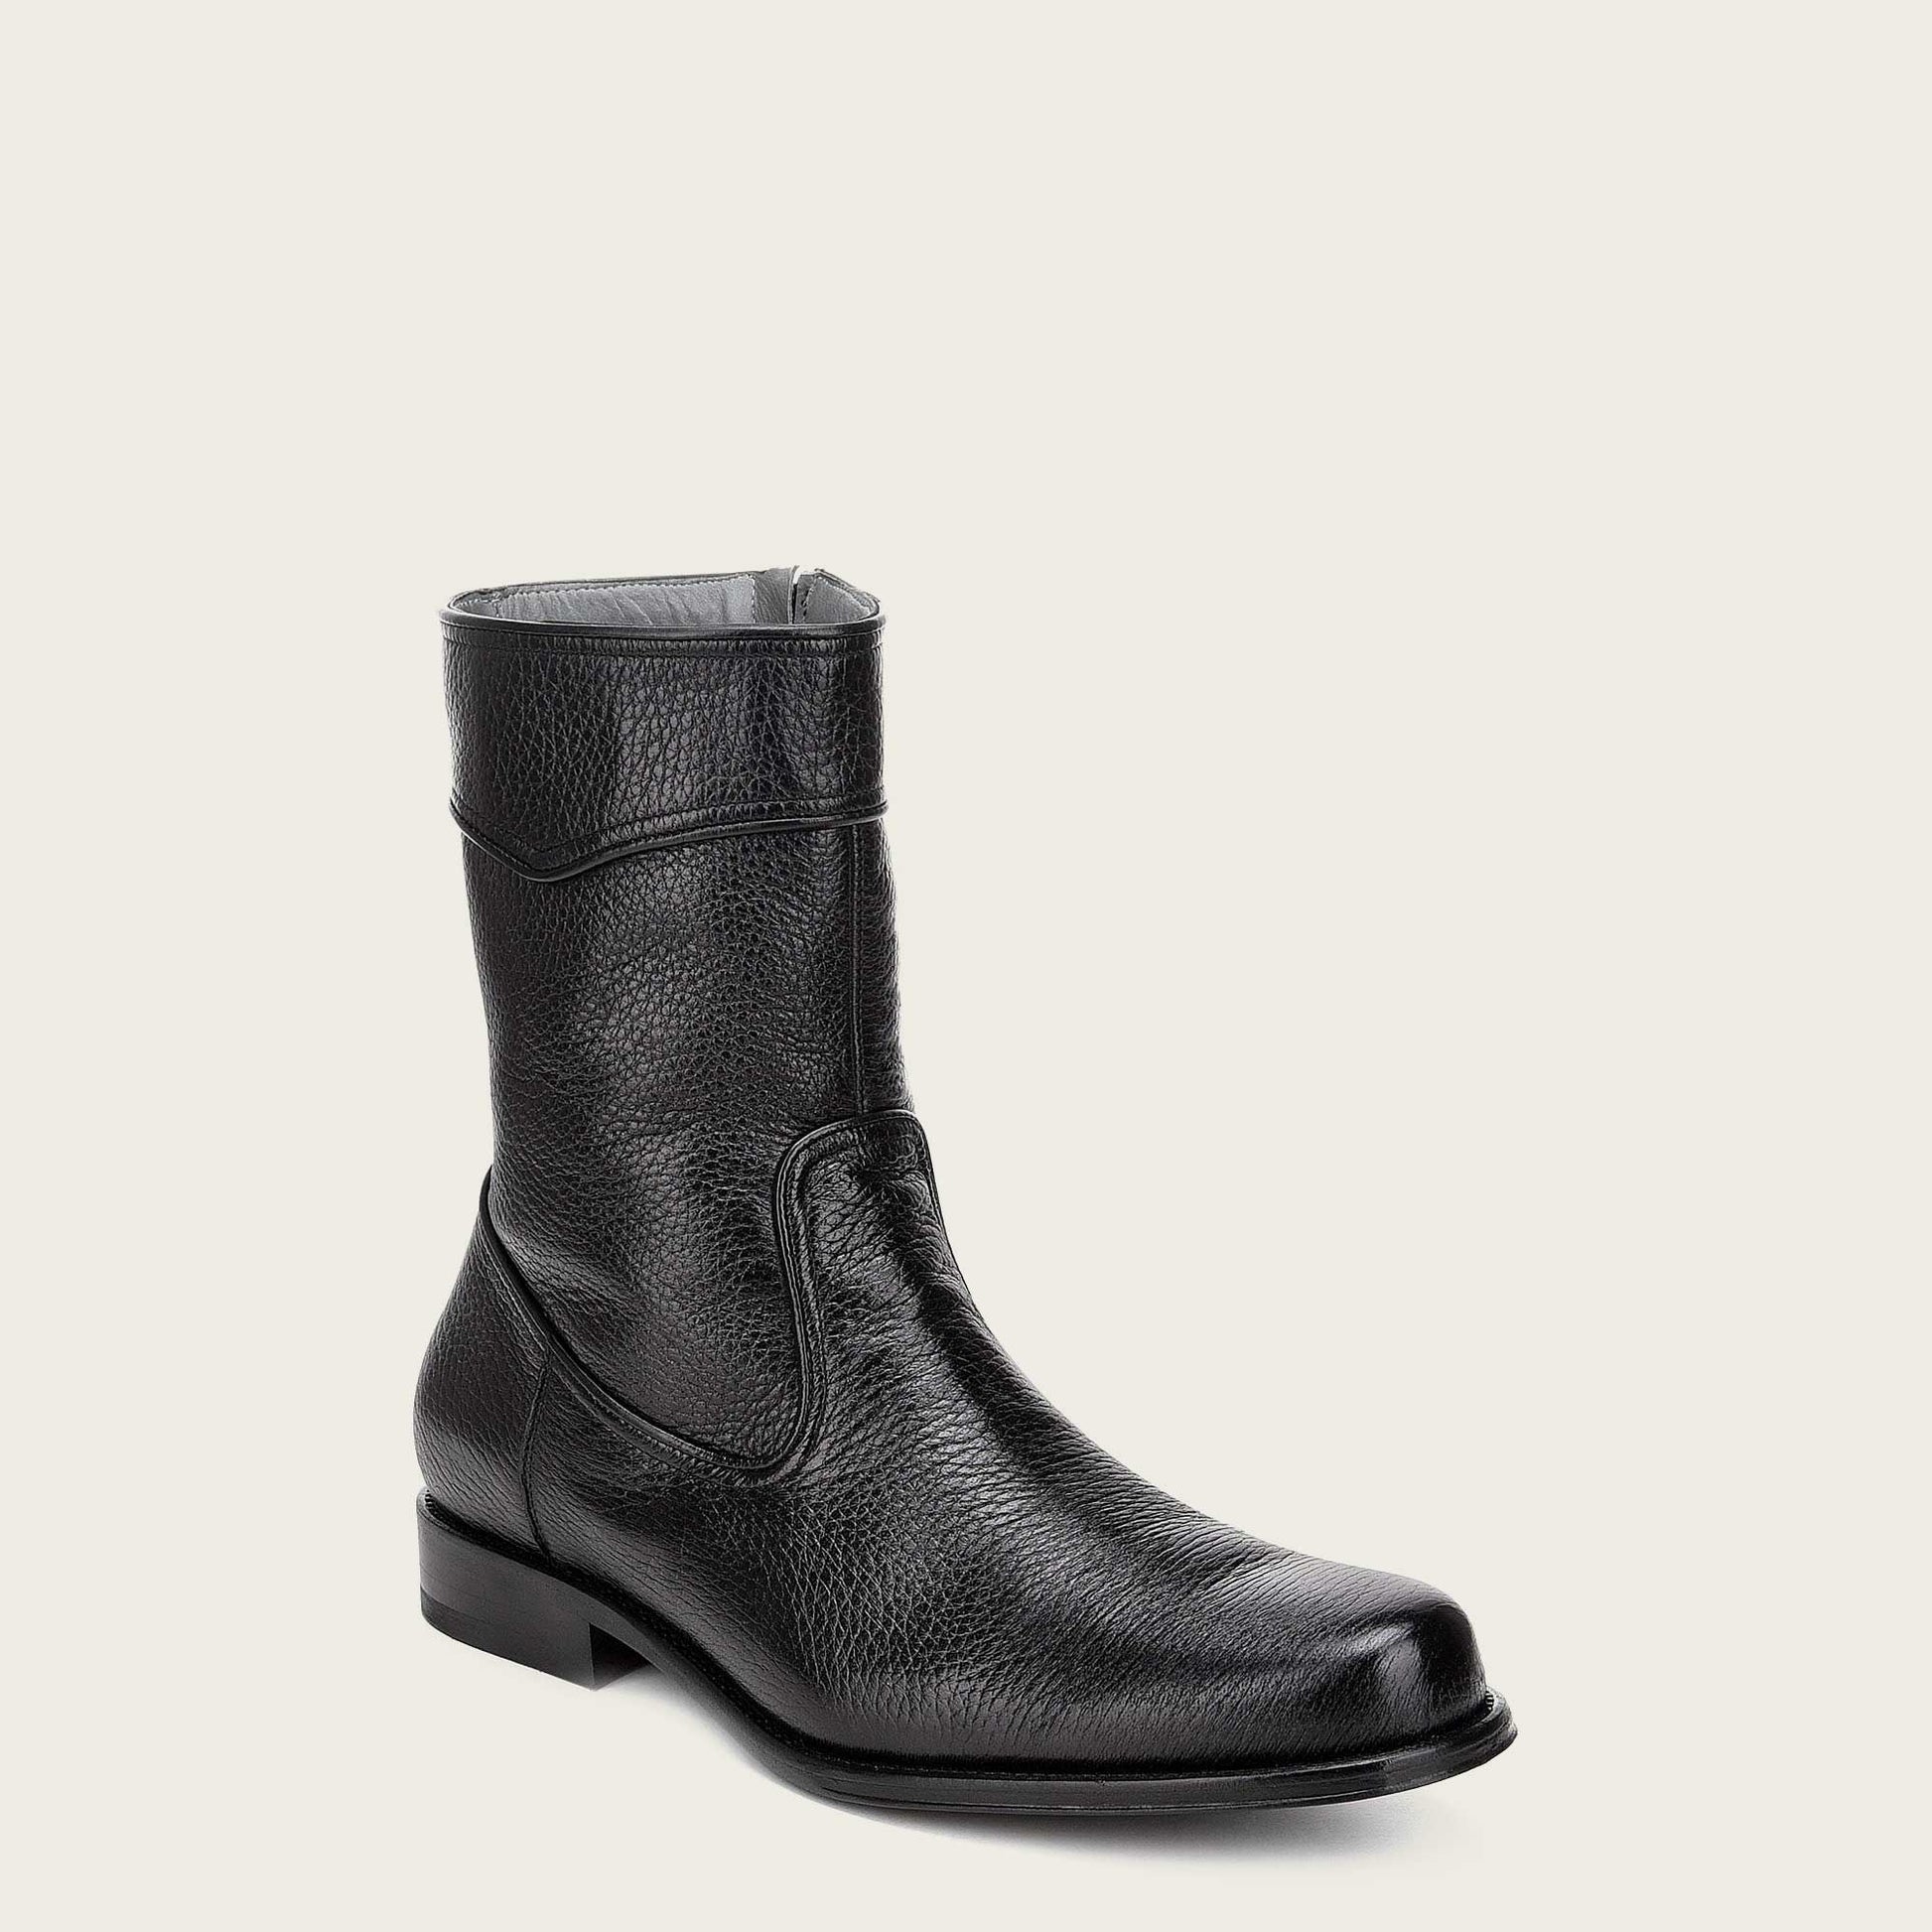 Artisanal hand-painted black leather boot featuring raised edges on the rims for a stylish and rugged look